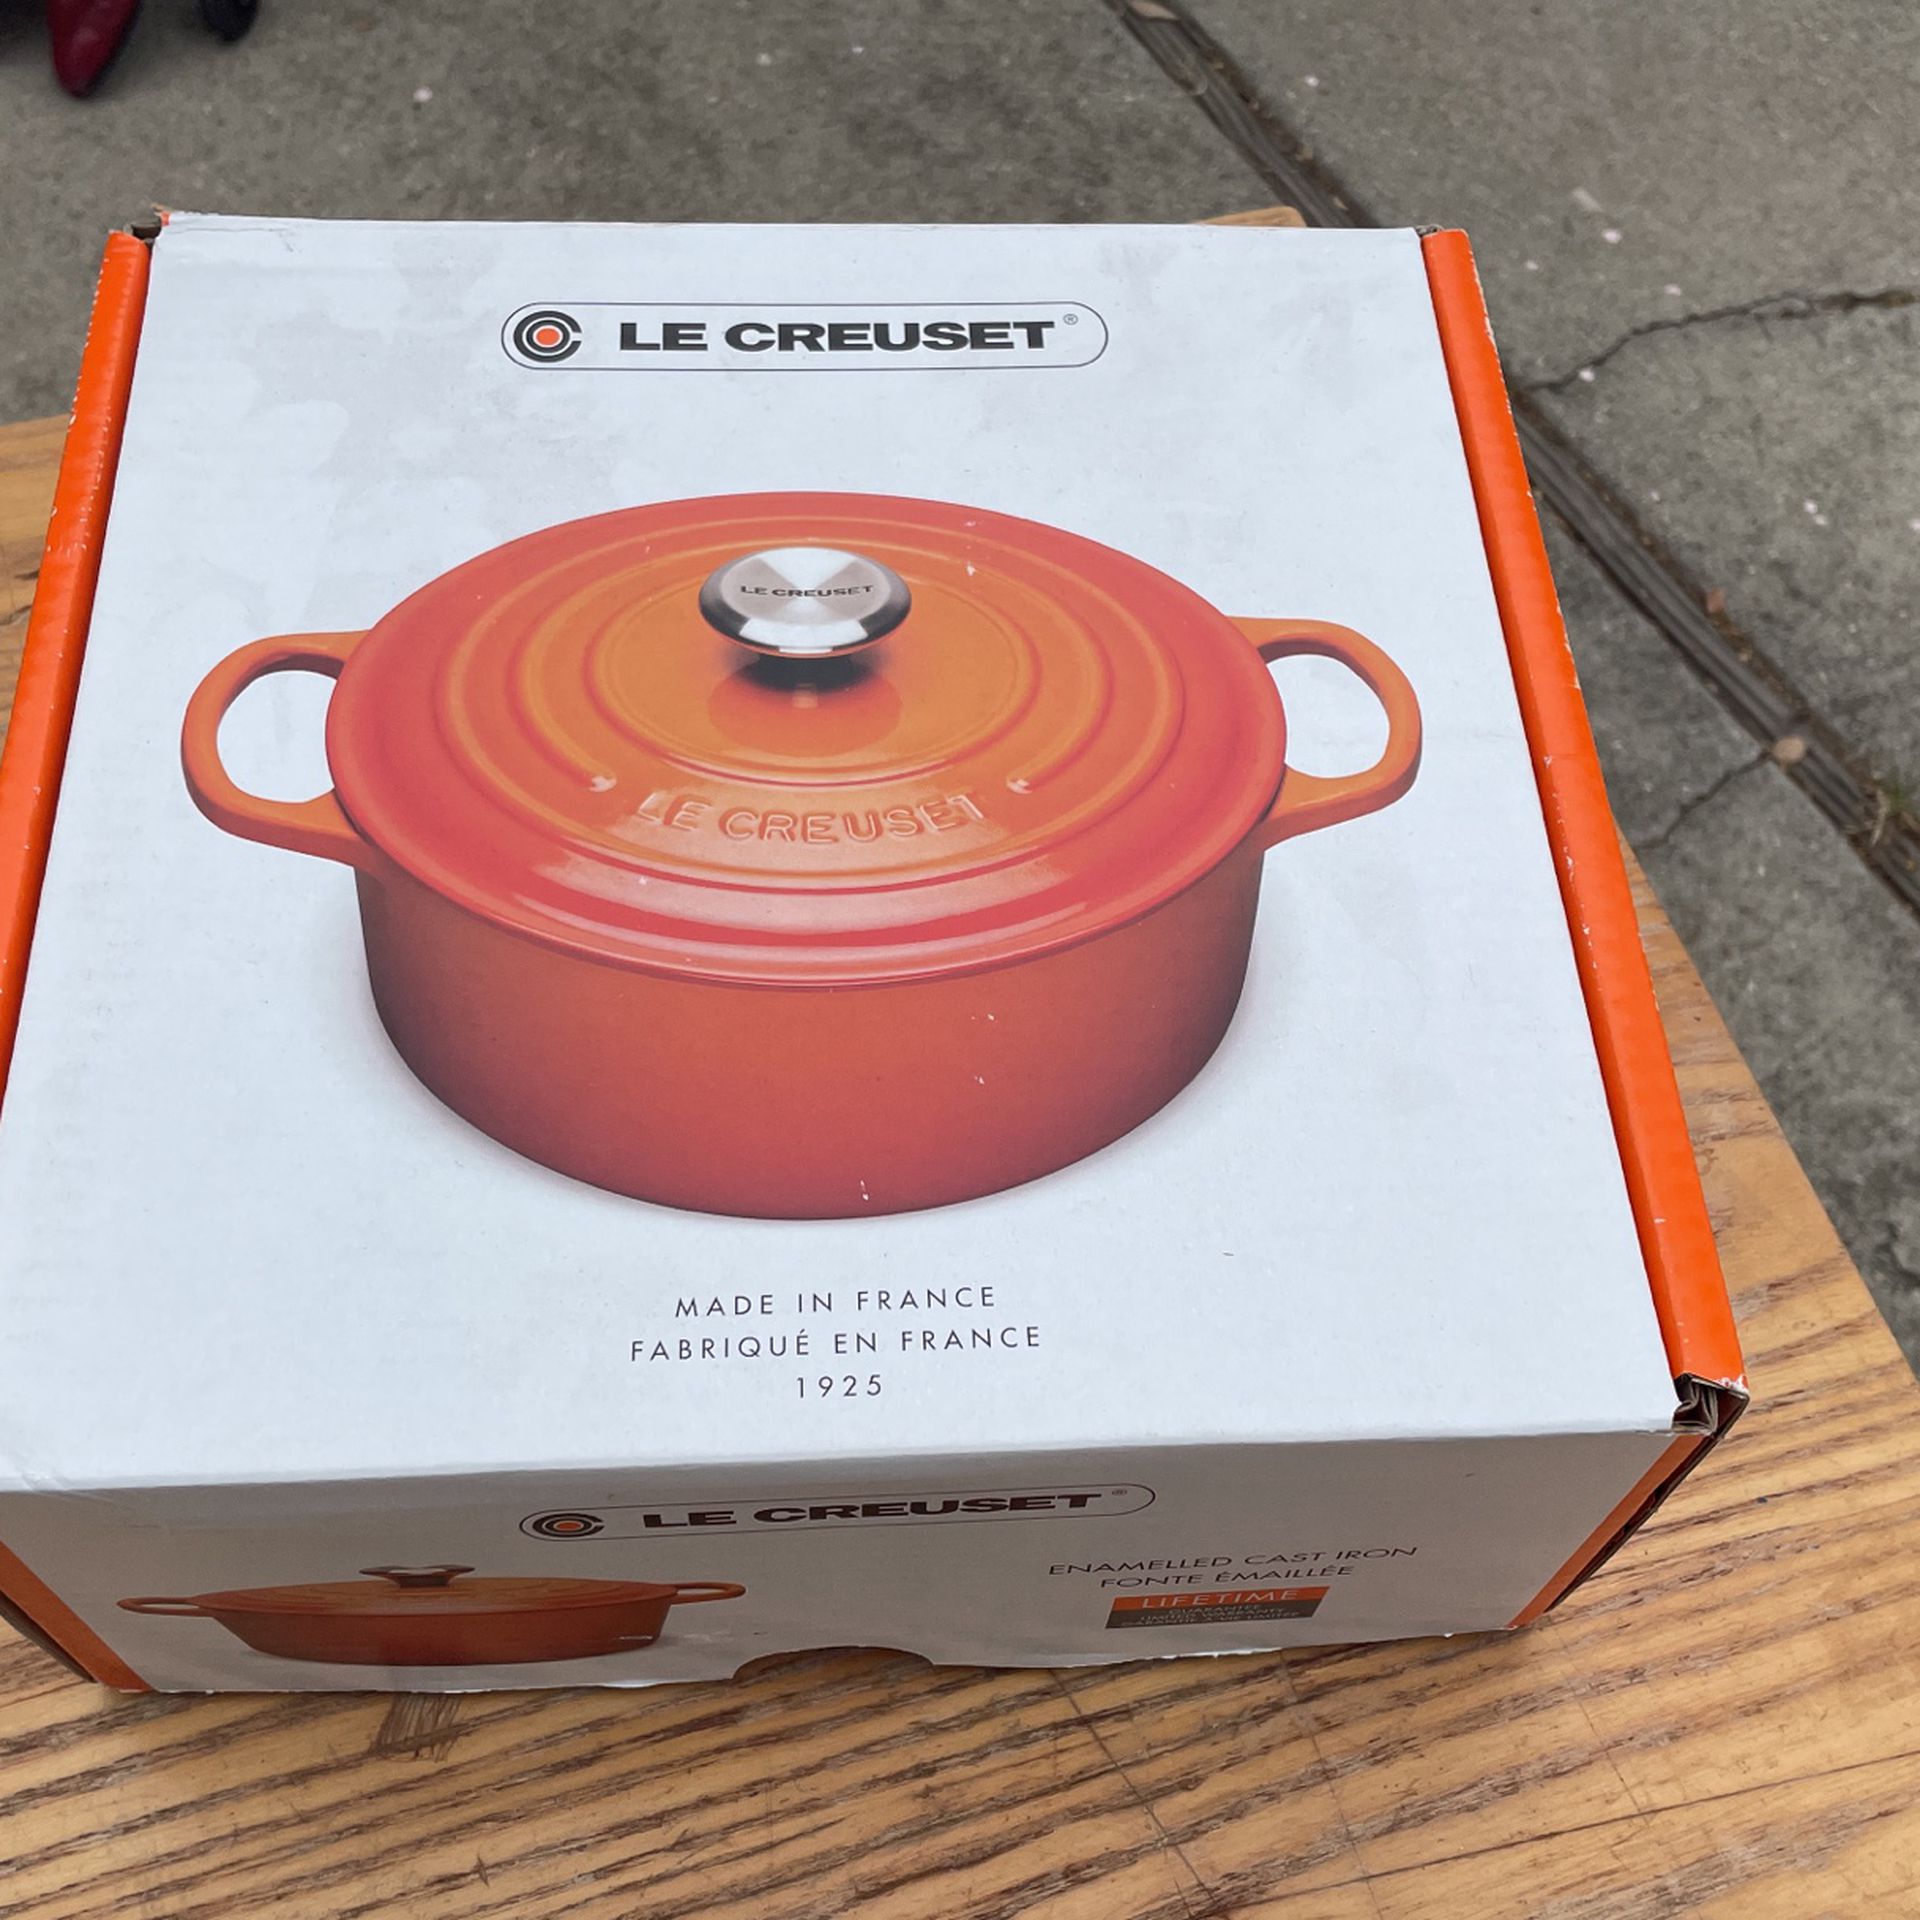 Red Cuisinart 3.5 Enameled Dutch Oven for Sale in Yorba Linda, CA - OfferUp